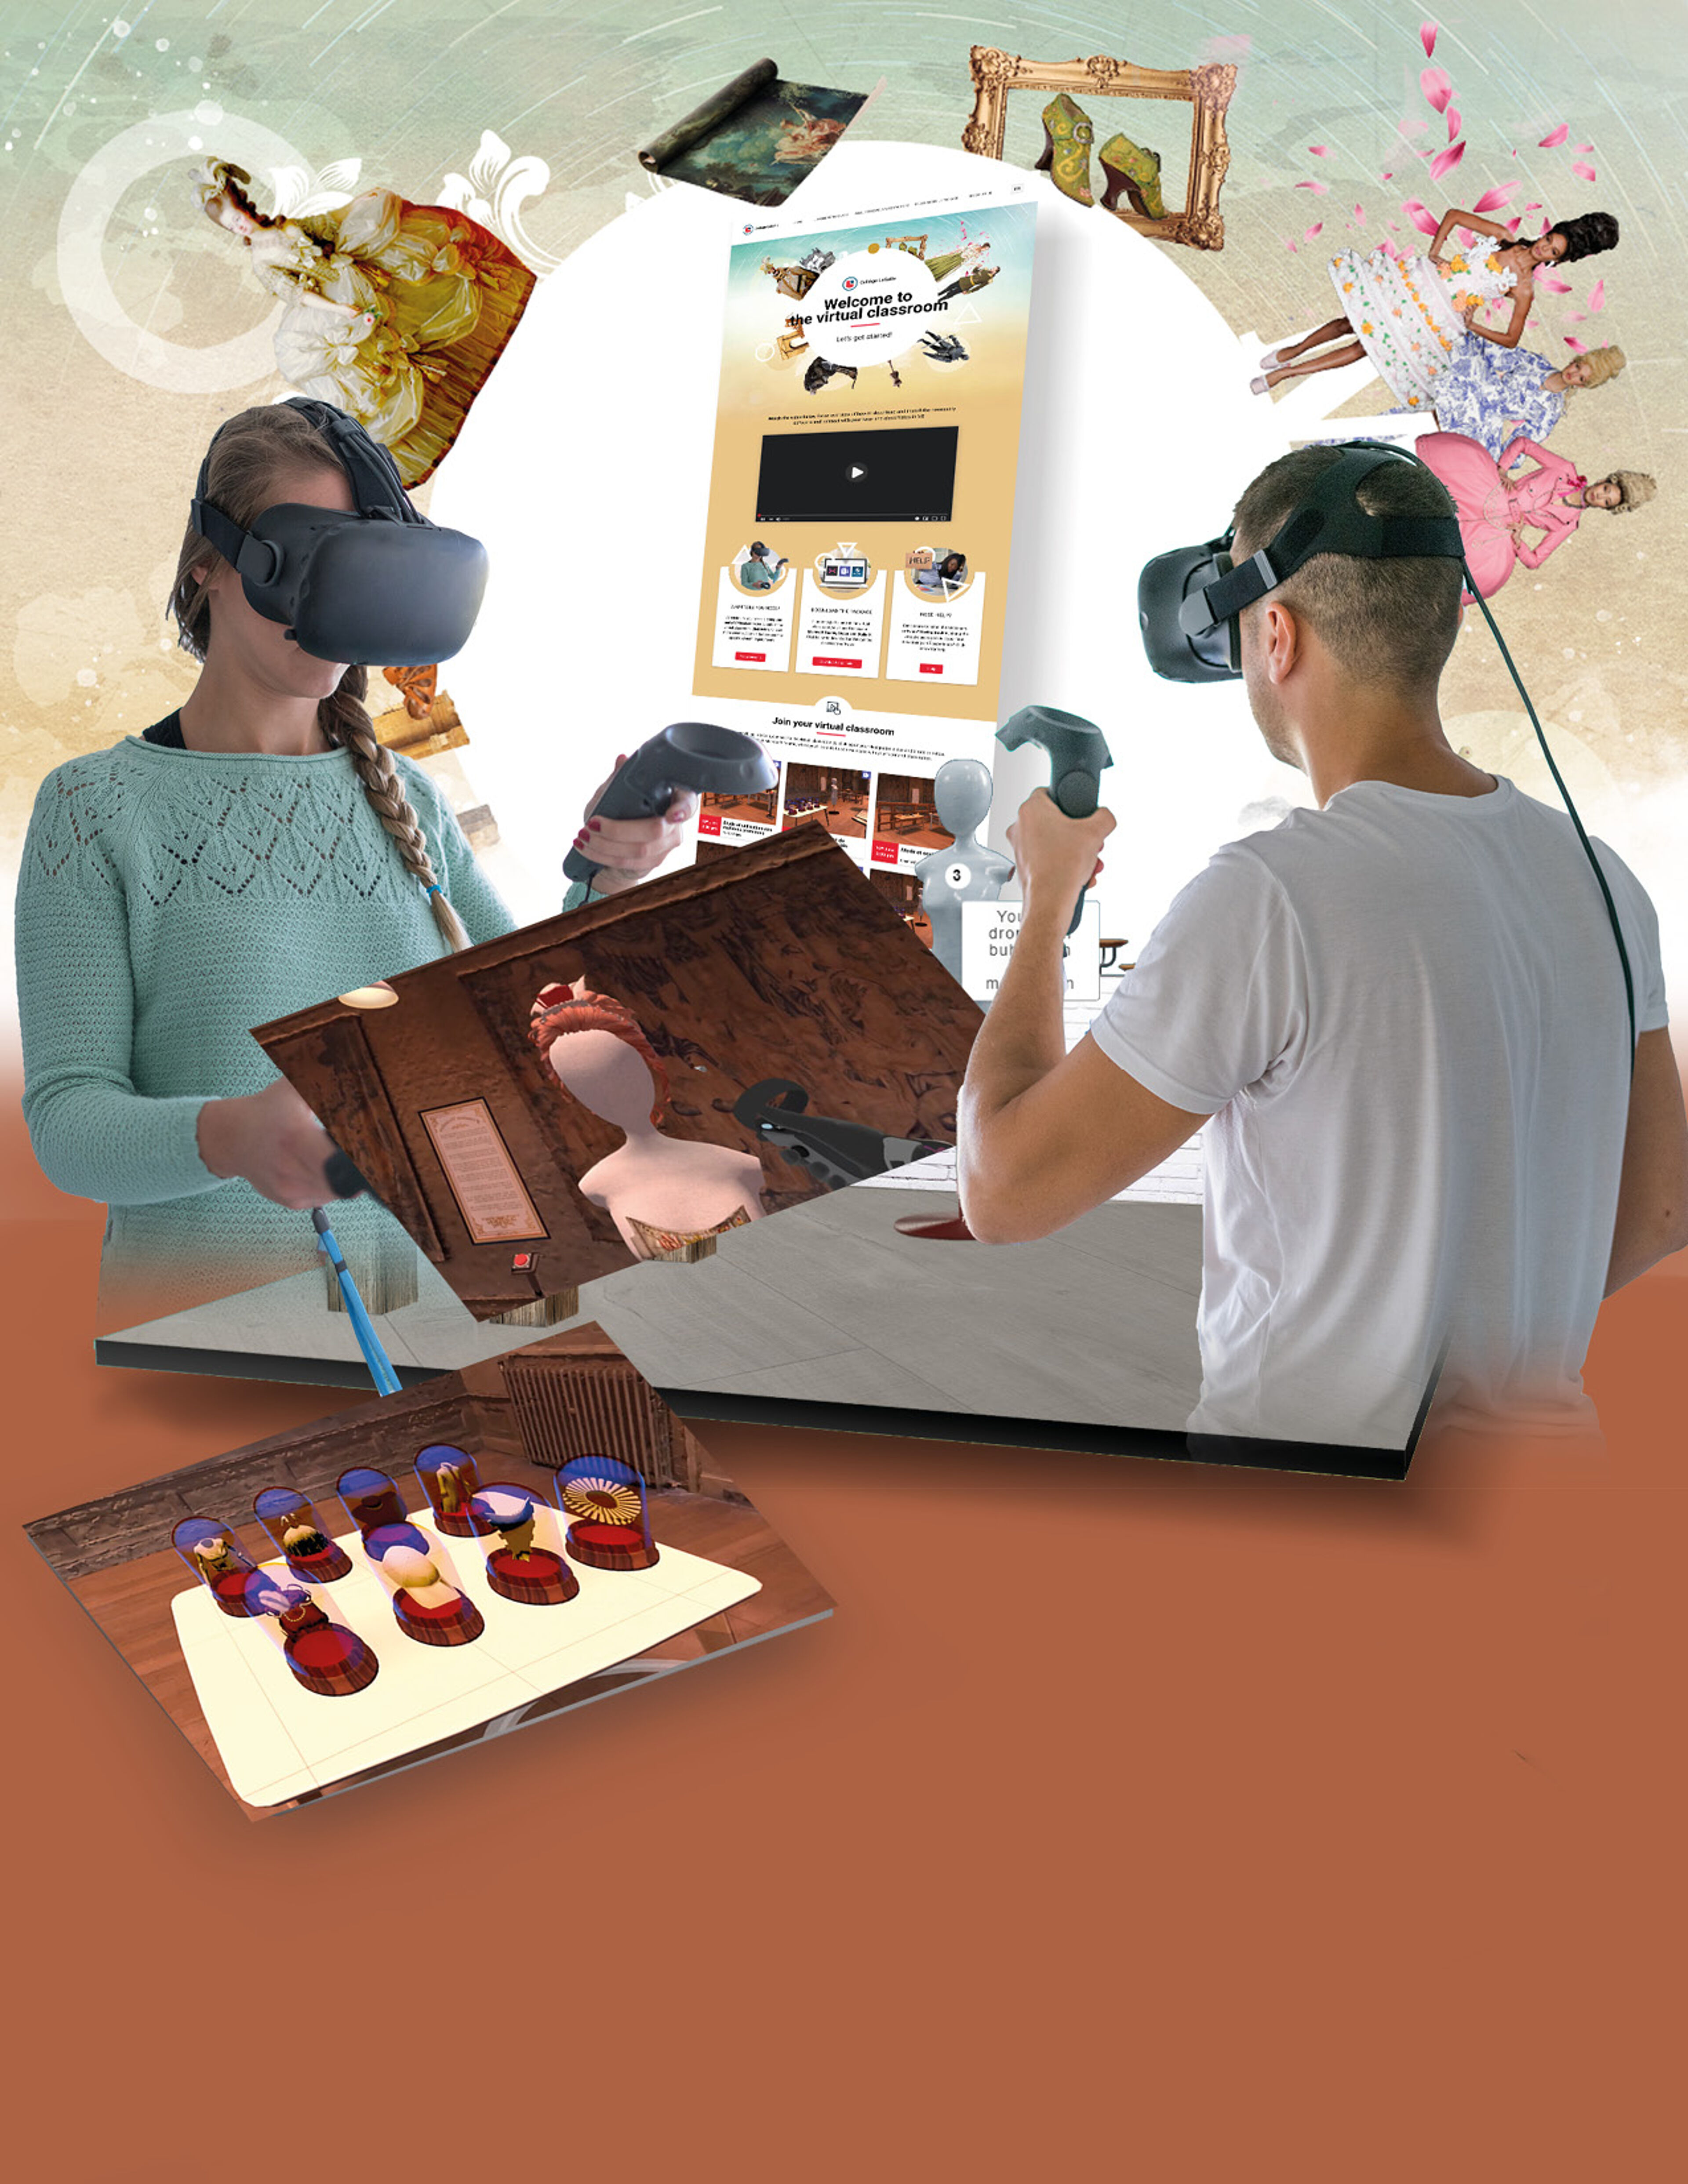 Two people engaged in a VR simulation, with artistic imagery in the background.